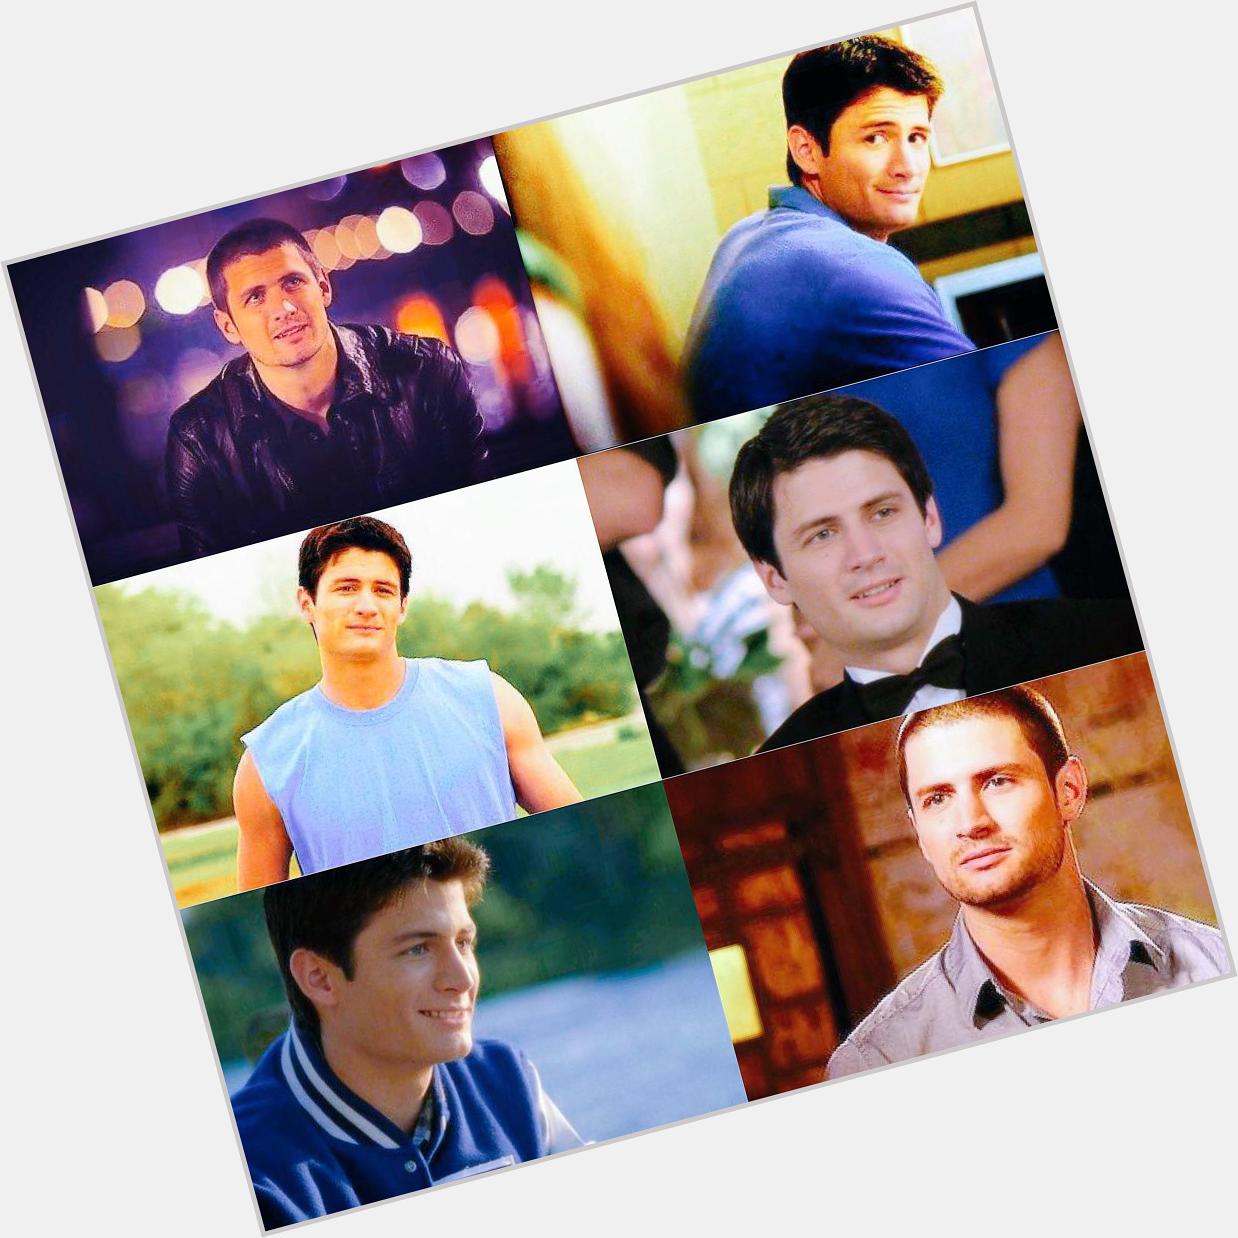 Happy birthday to James Lafferty  you may be 30 now, but you\re still Nathan Scott in my heart  